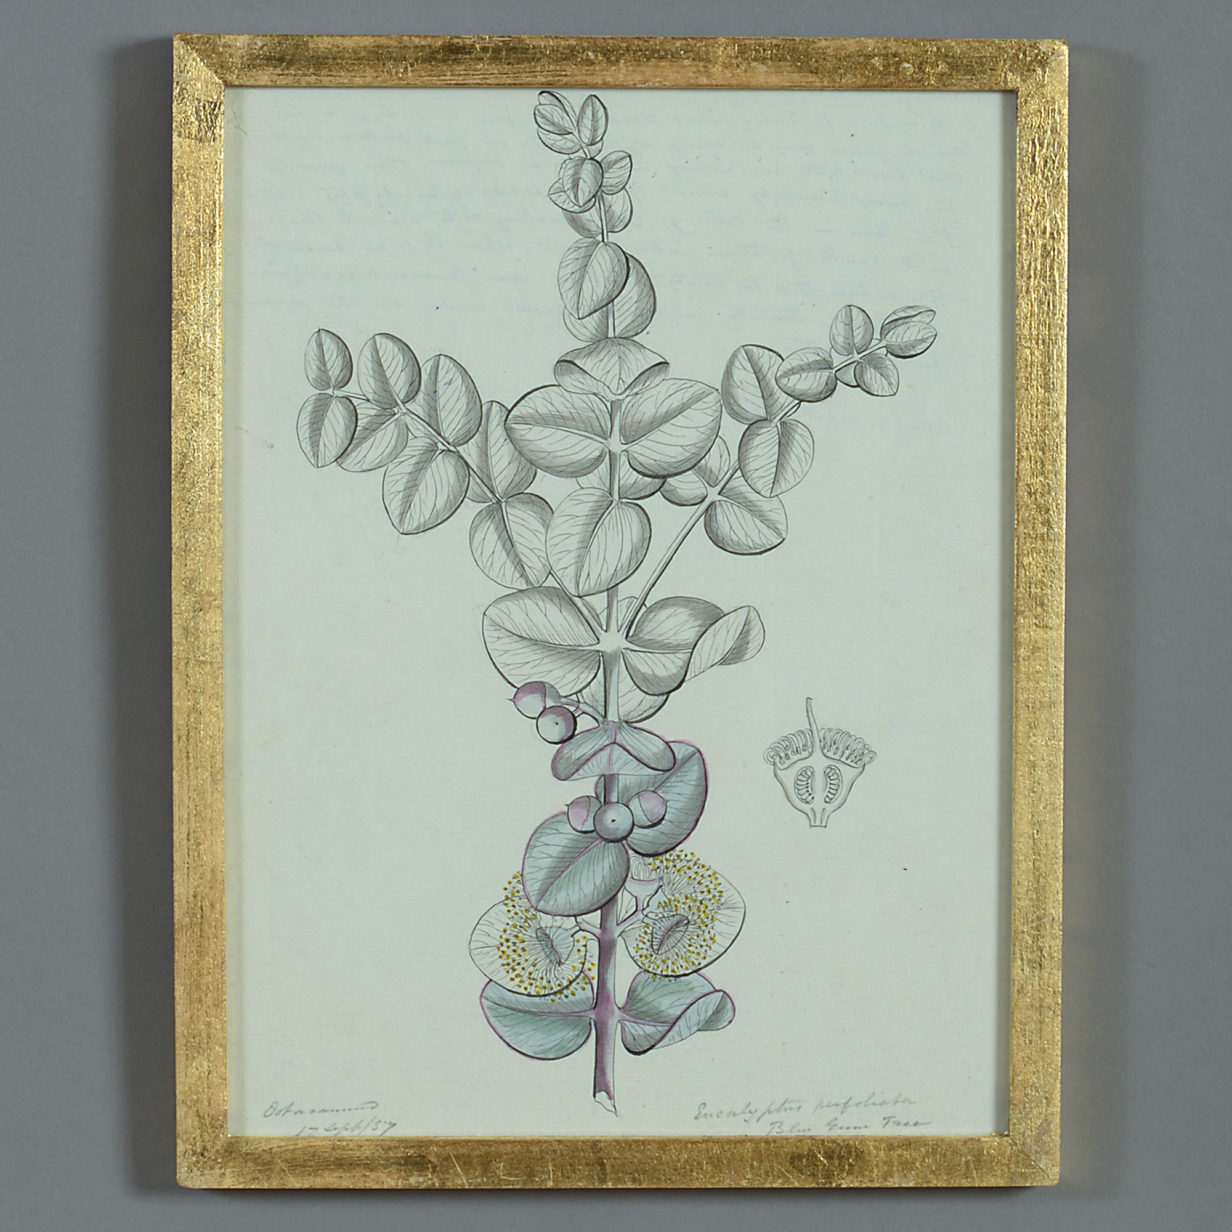 A rare mid-19th century pen & ink and watercolour botanical study of a eucalyptus